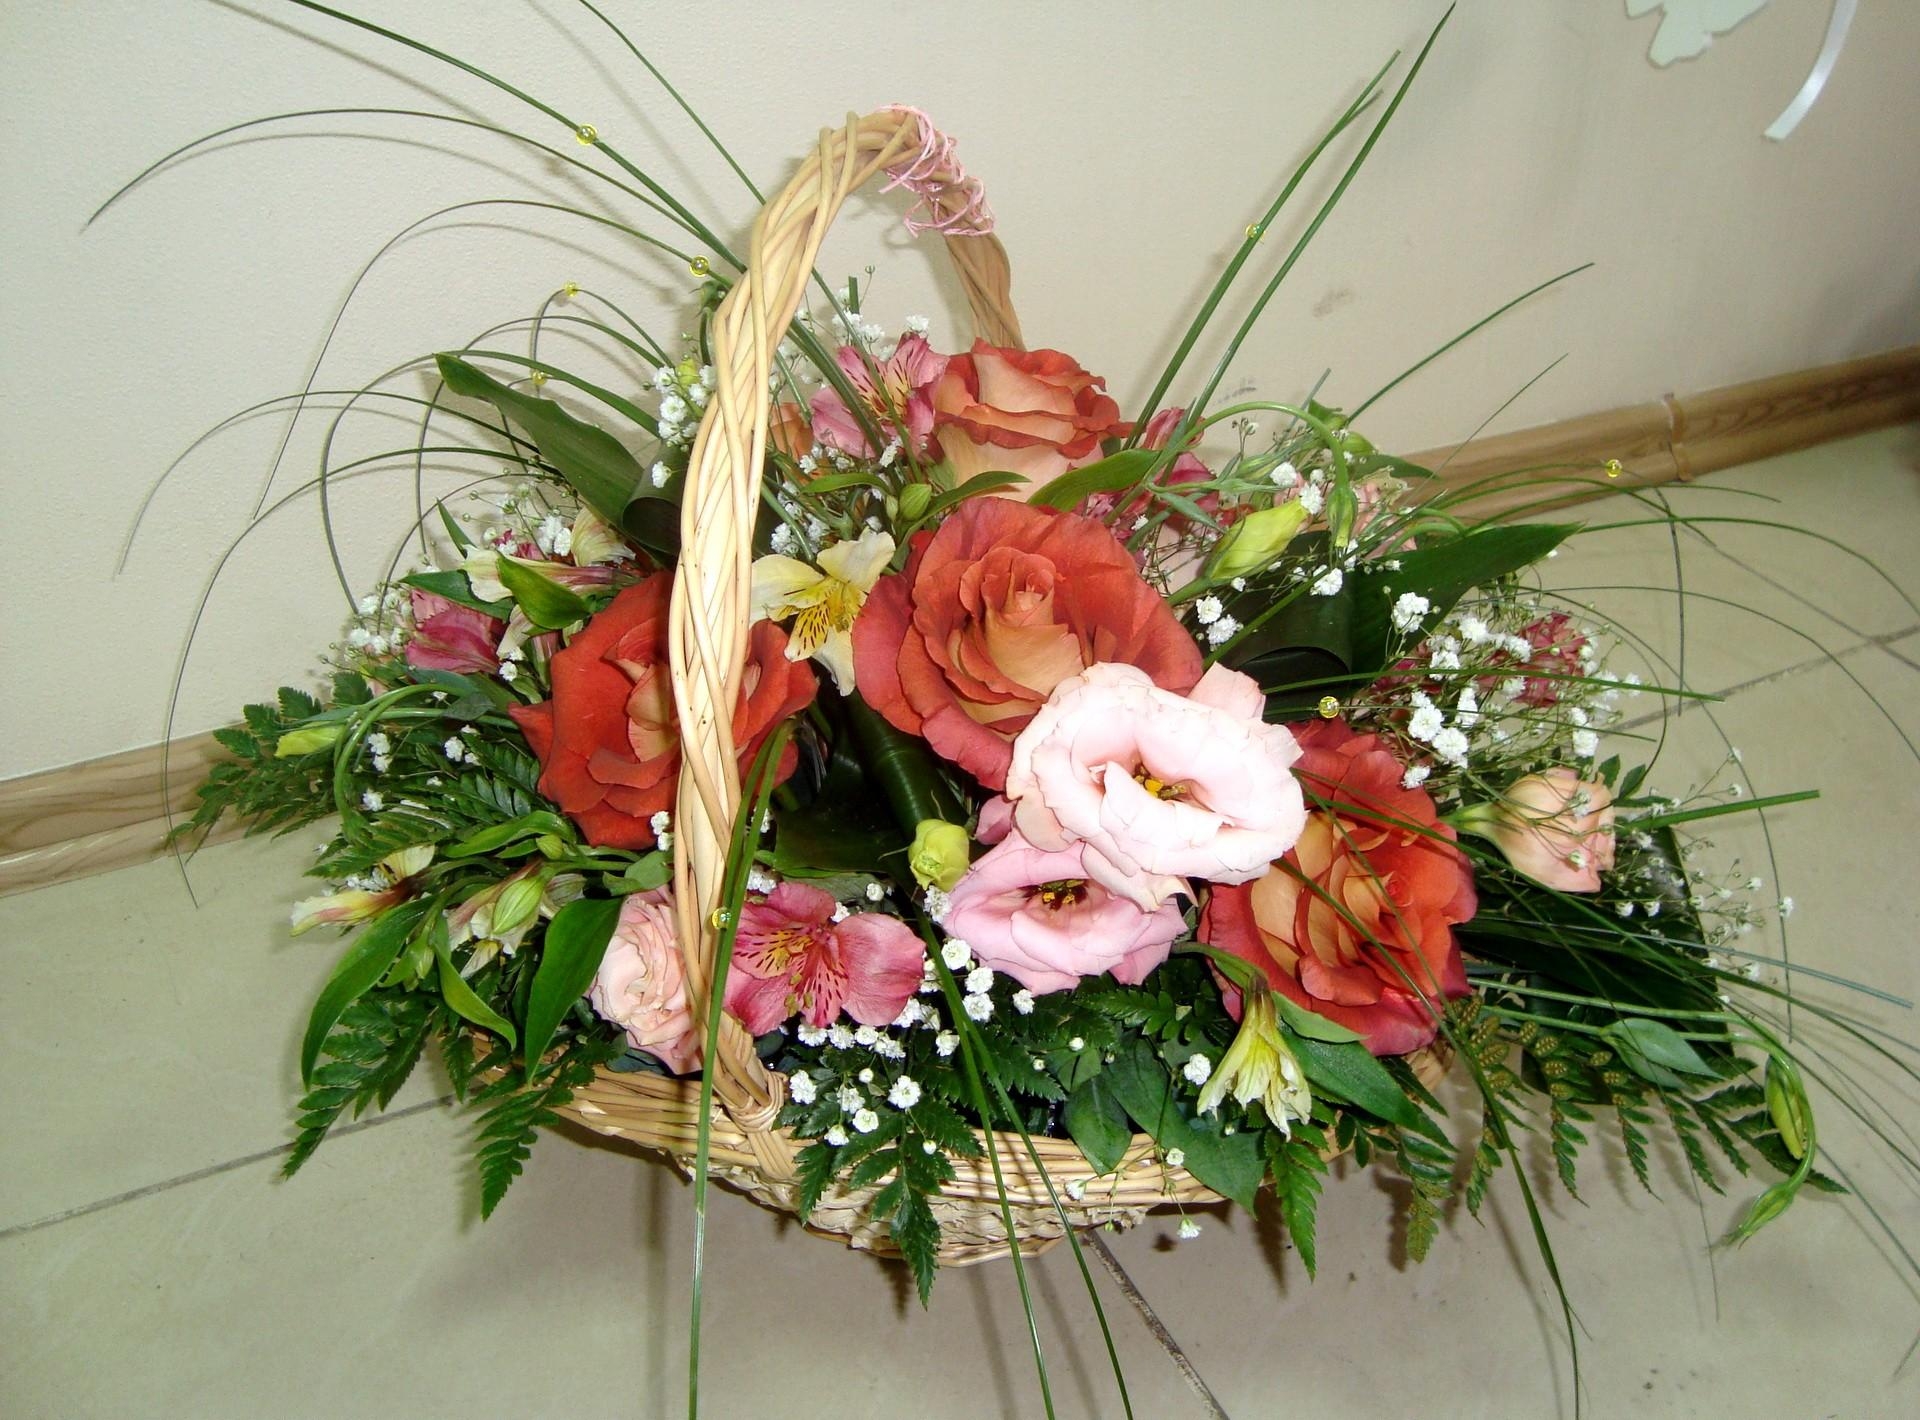 flowers, roses, fern, alstroemeria, gipsophile, gypsophilus, basket, composition, lisianthus russell, lisiantus russell